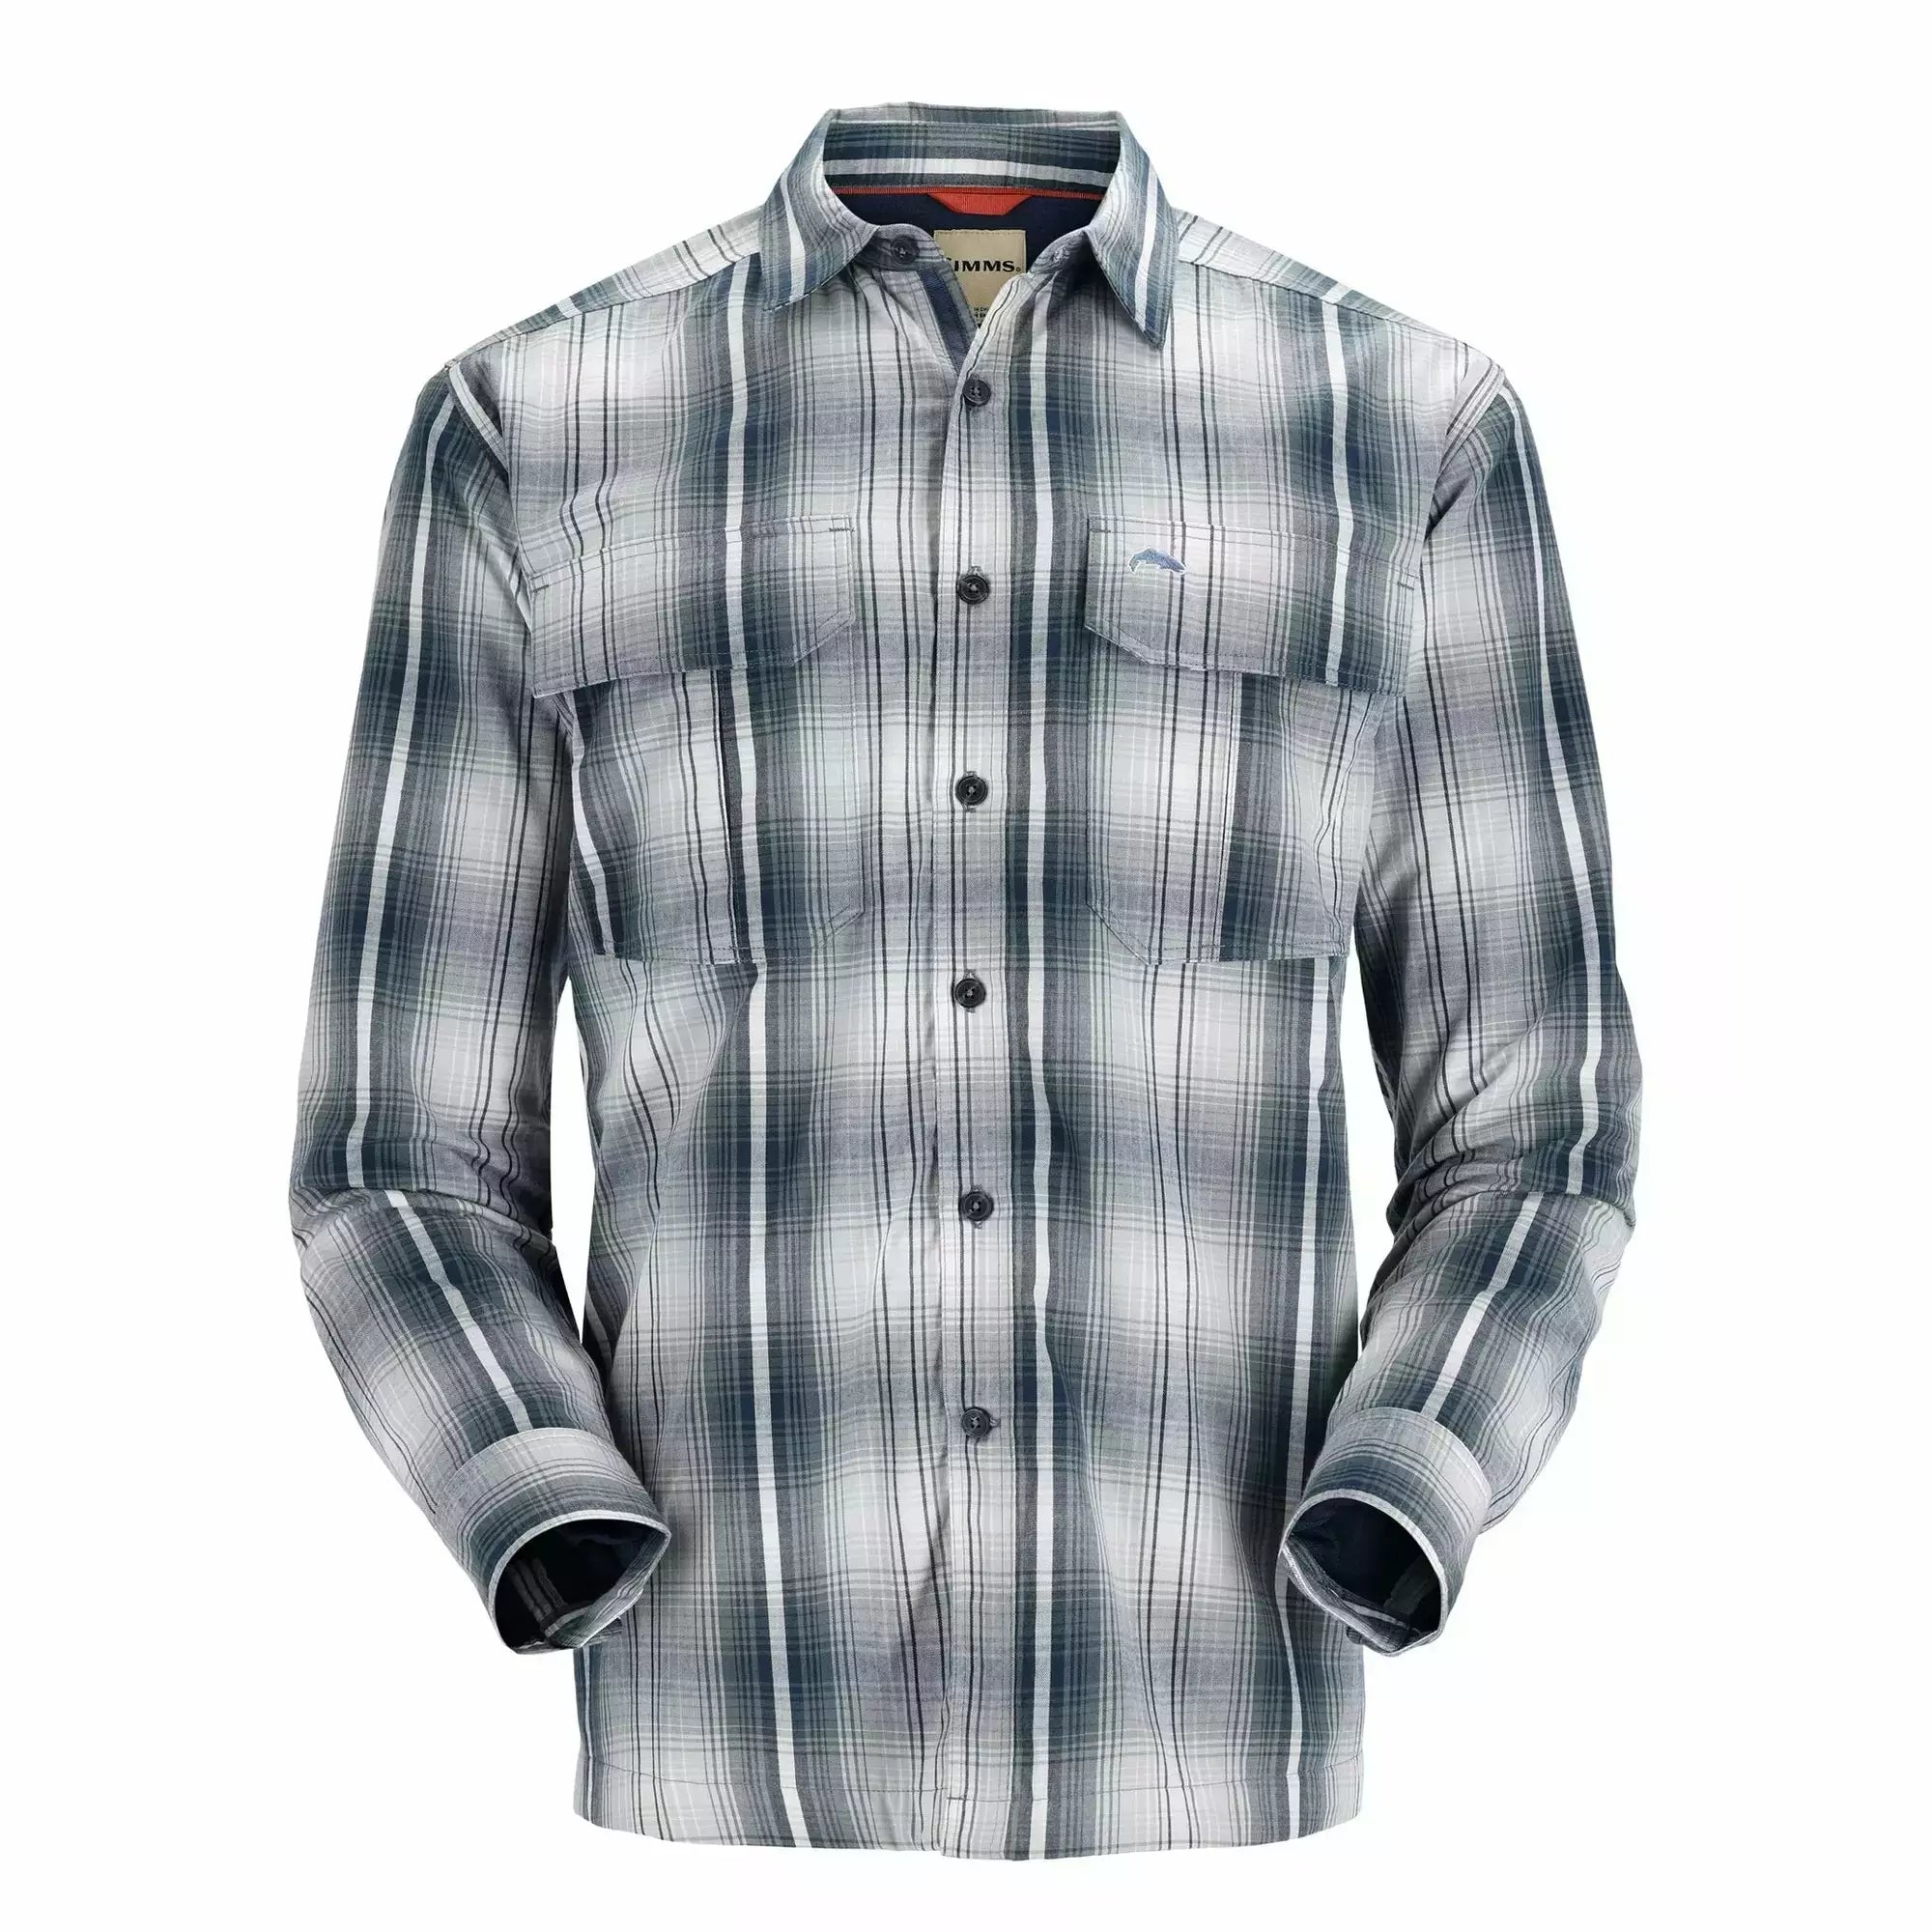 Simms Men's ColdWeather Shirt - Navy Sterling Plaid